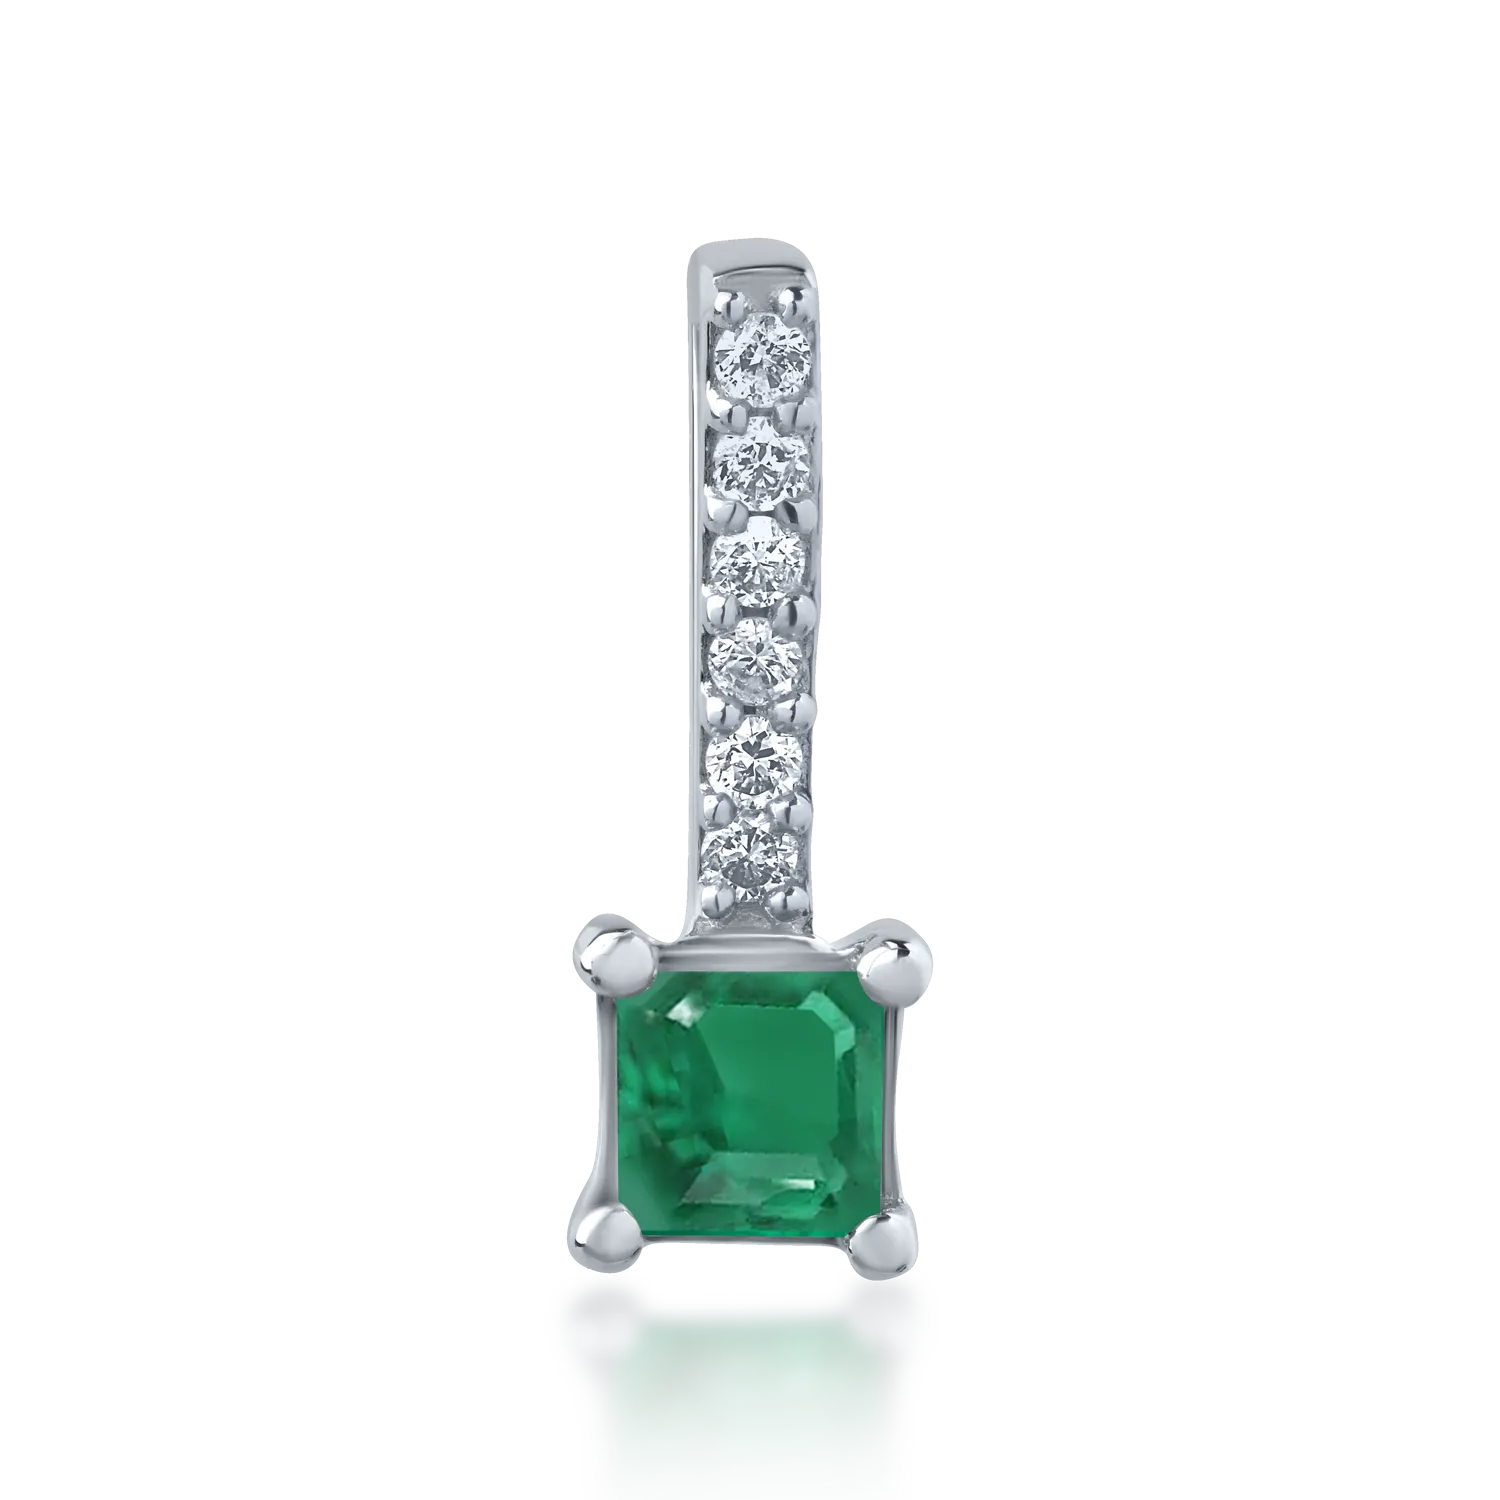 14K white gold pendant with a 0.142ct emerald and 0.03ct diamonds